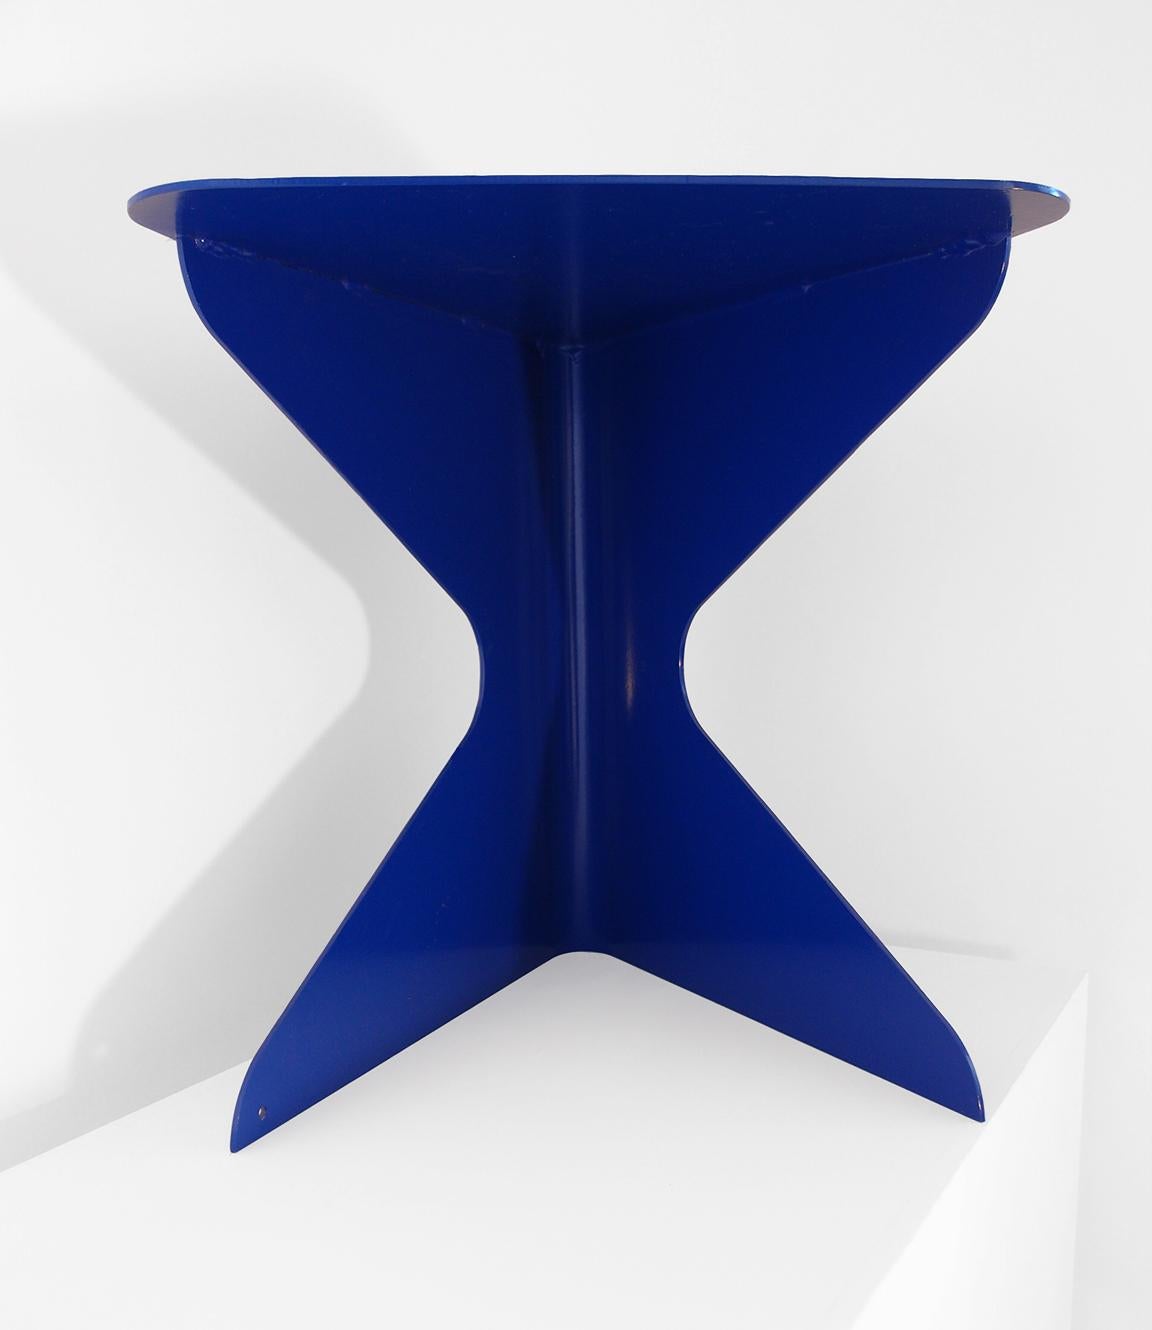 Powder-Coated Modern Metal Stool, Stainless Steel, 'LM Stool' For Sale